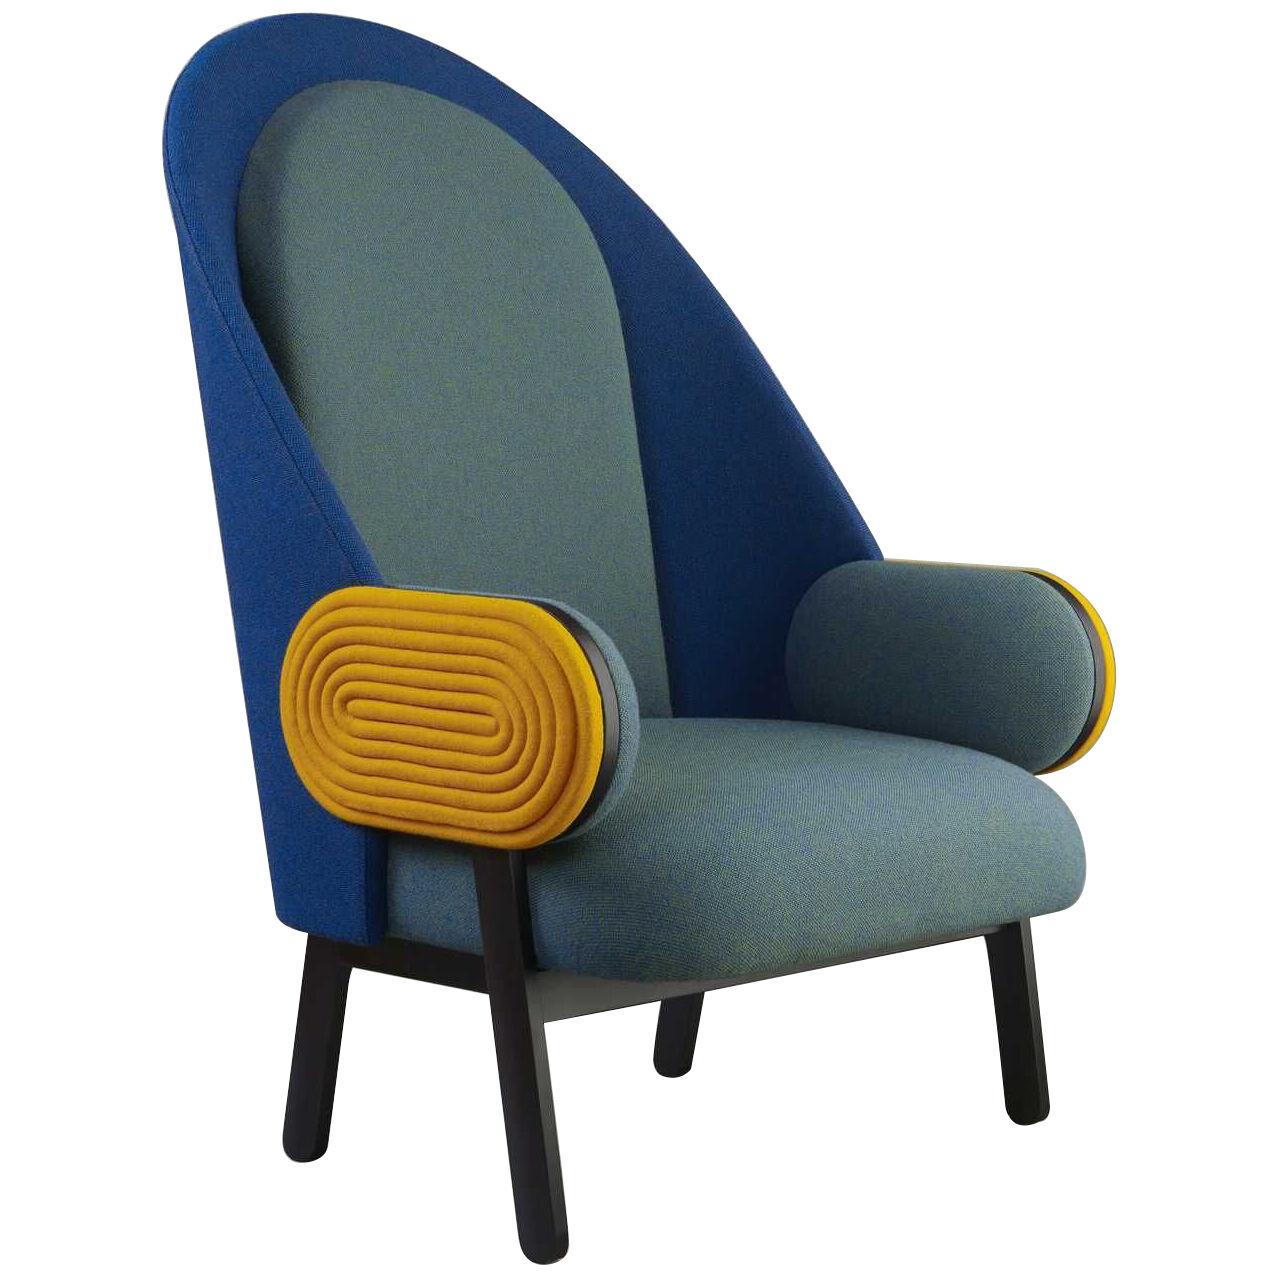 'MOON', a Contemporary Armchair with a Vintage Twist